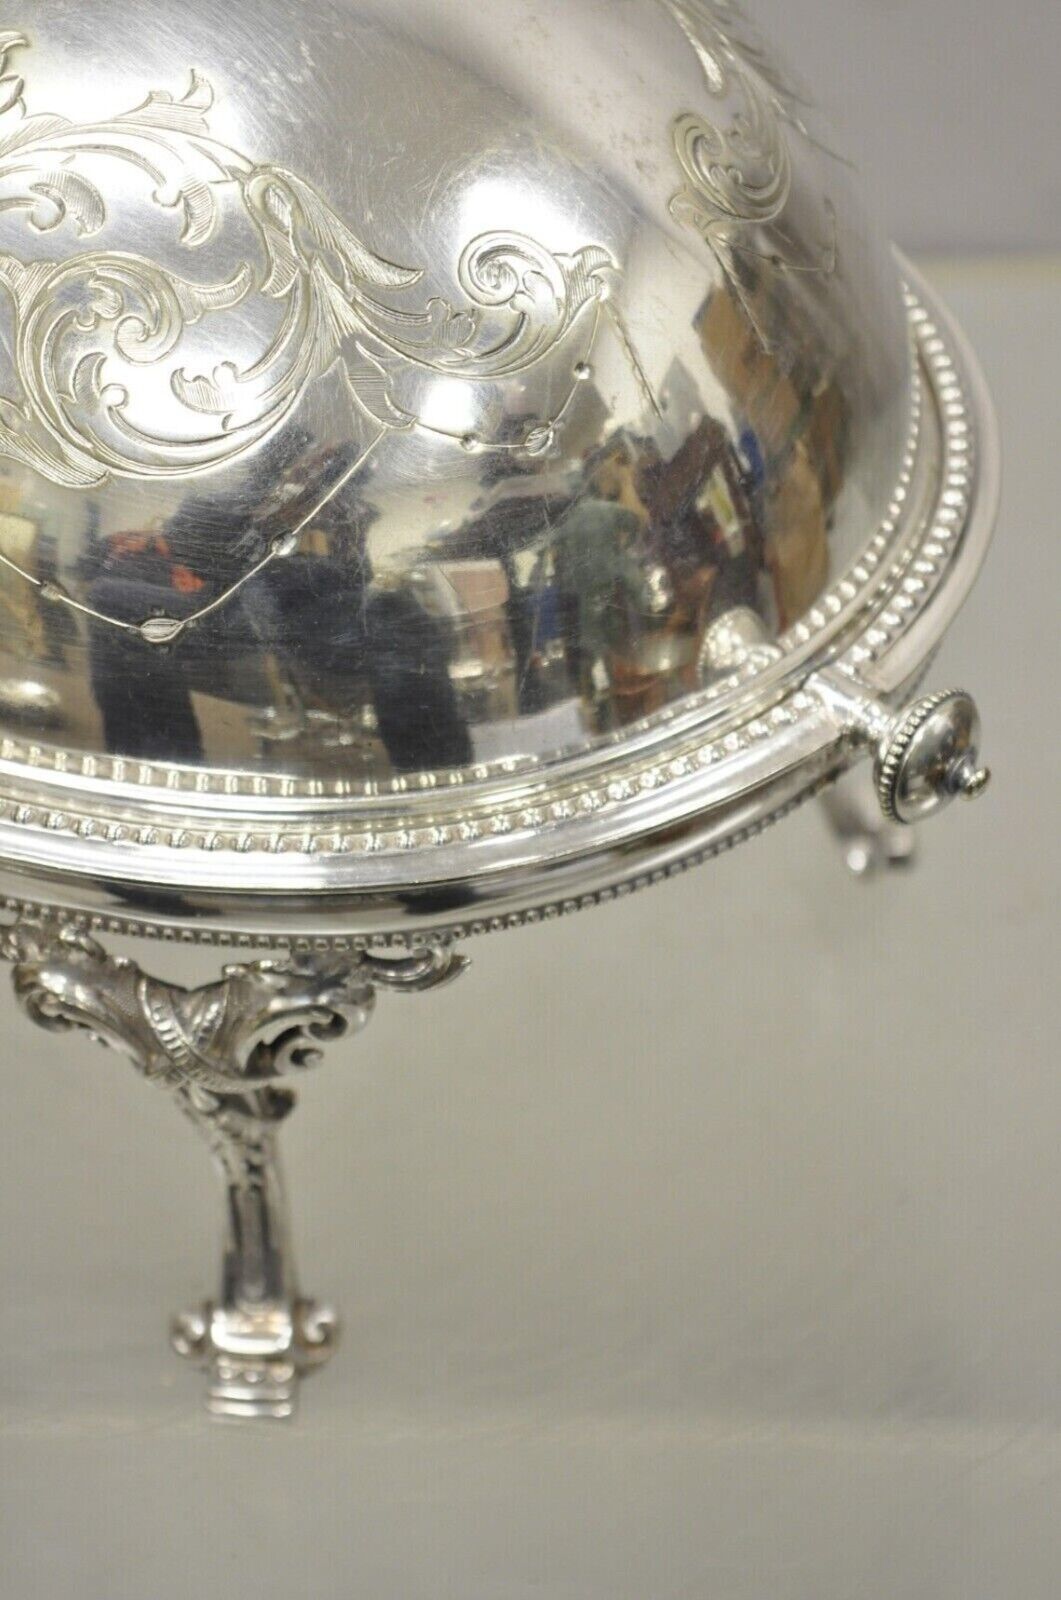 Antique Edwardian Silver Plated Revolving Dome Oval Chafing Dish Food Warmer